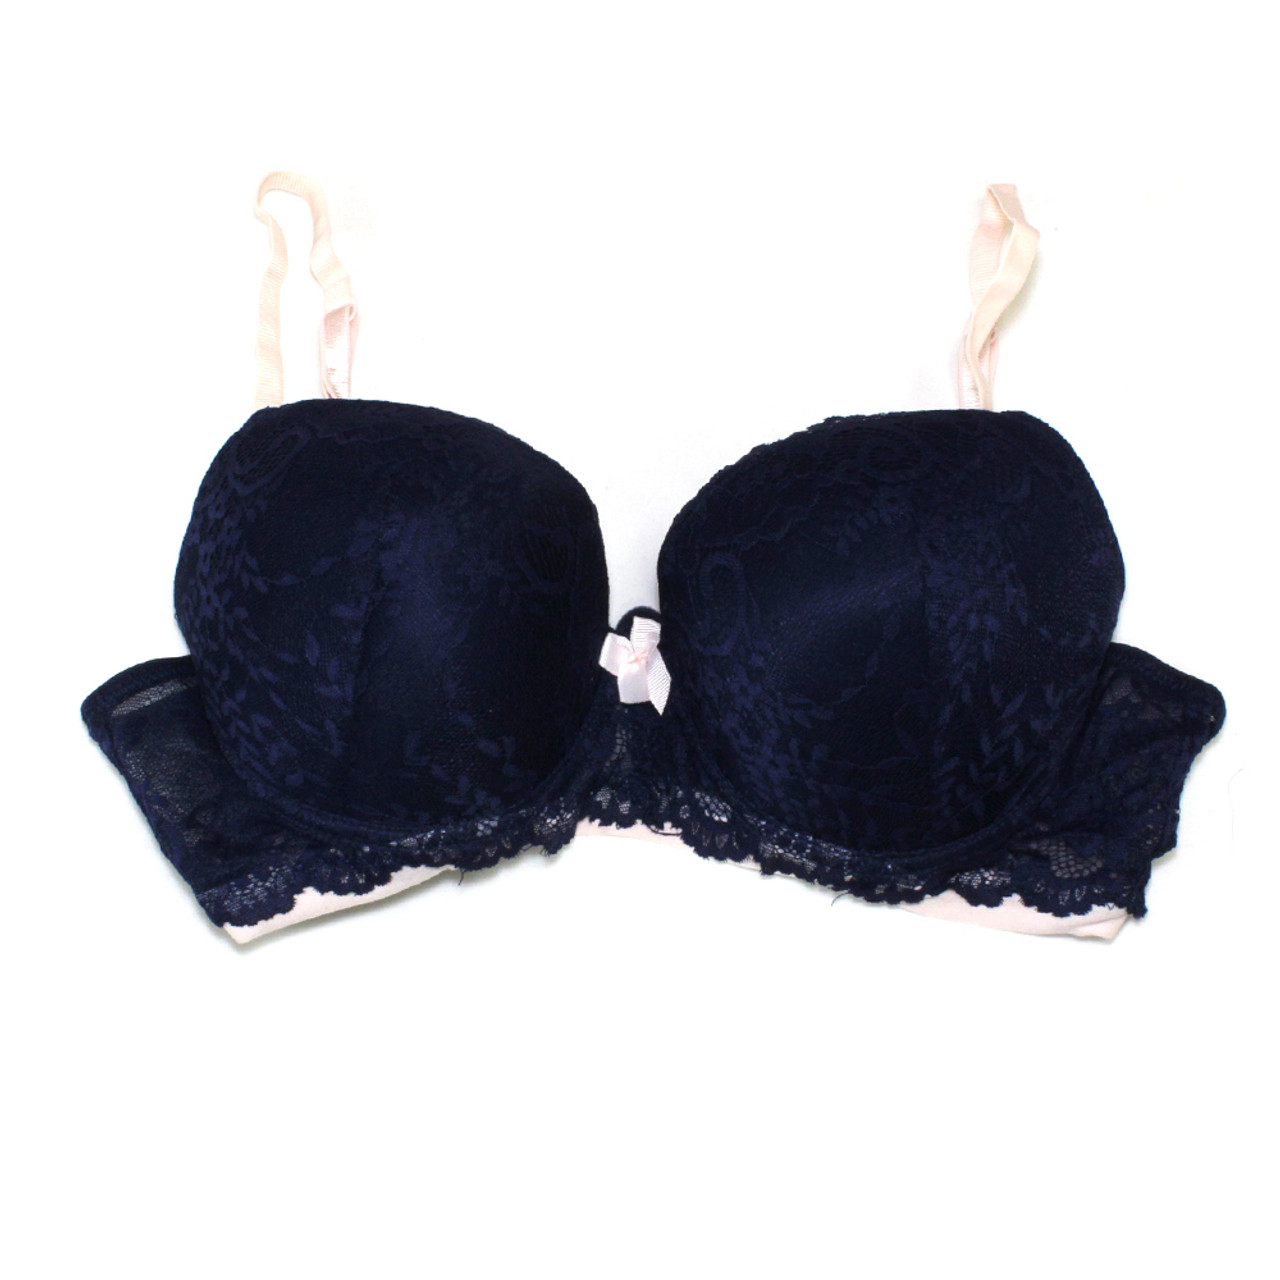 Buy Level 2 Push-Up Underwired Bra in Black- Lace Online India, Best  Prices, COD - Clovia - BR1966P13